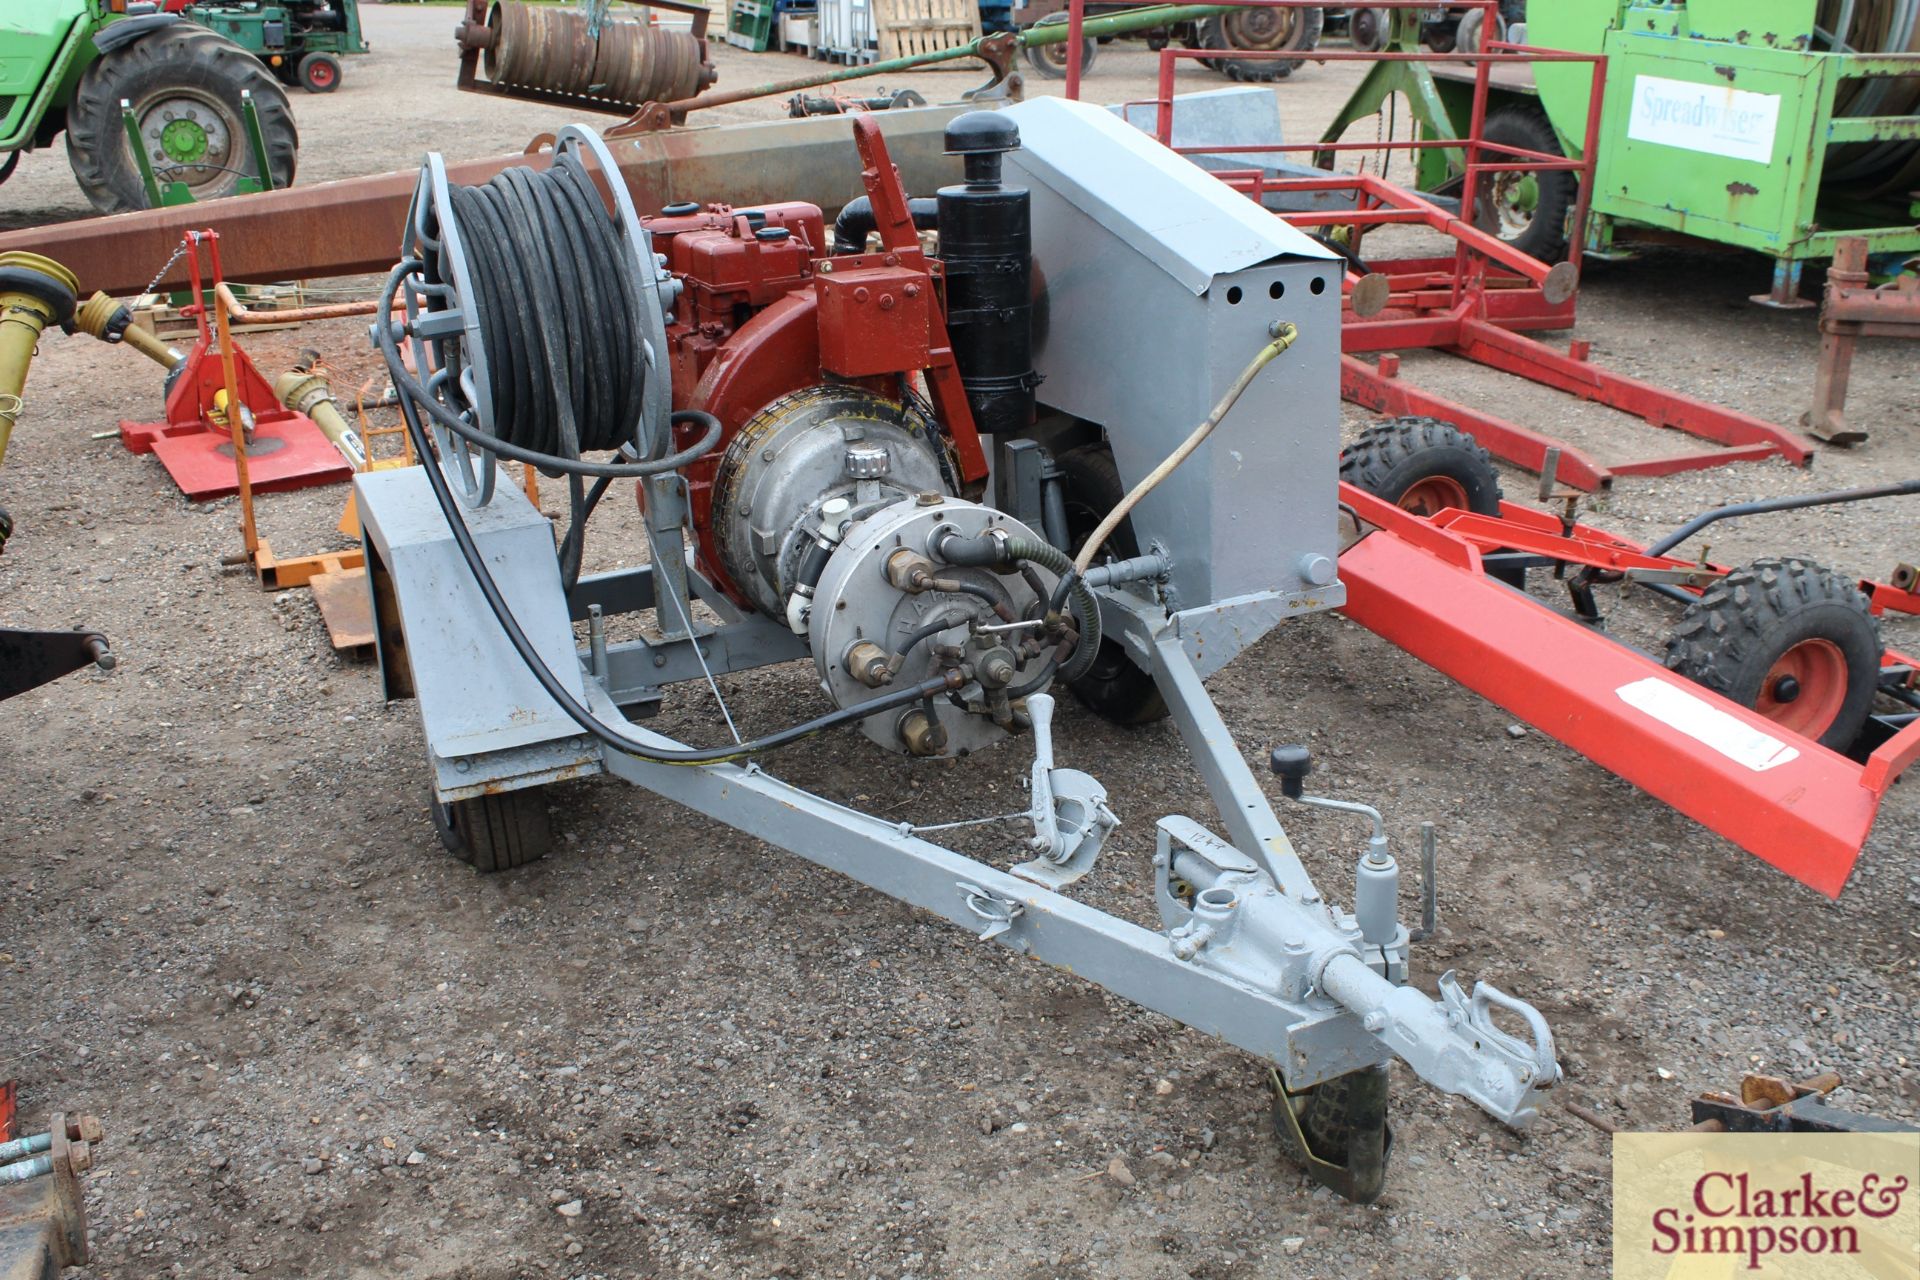 Harben fast tow high pressure drain jetter. With Lister diesel engine.